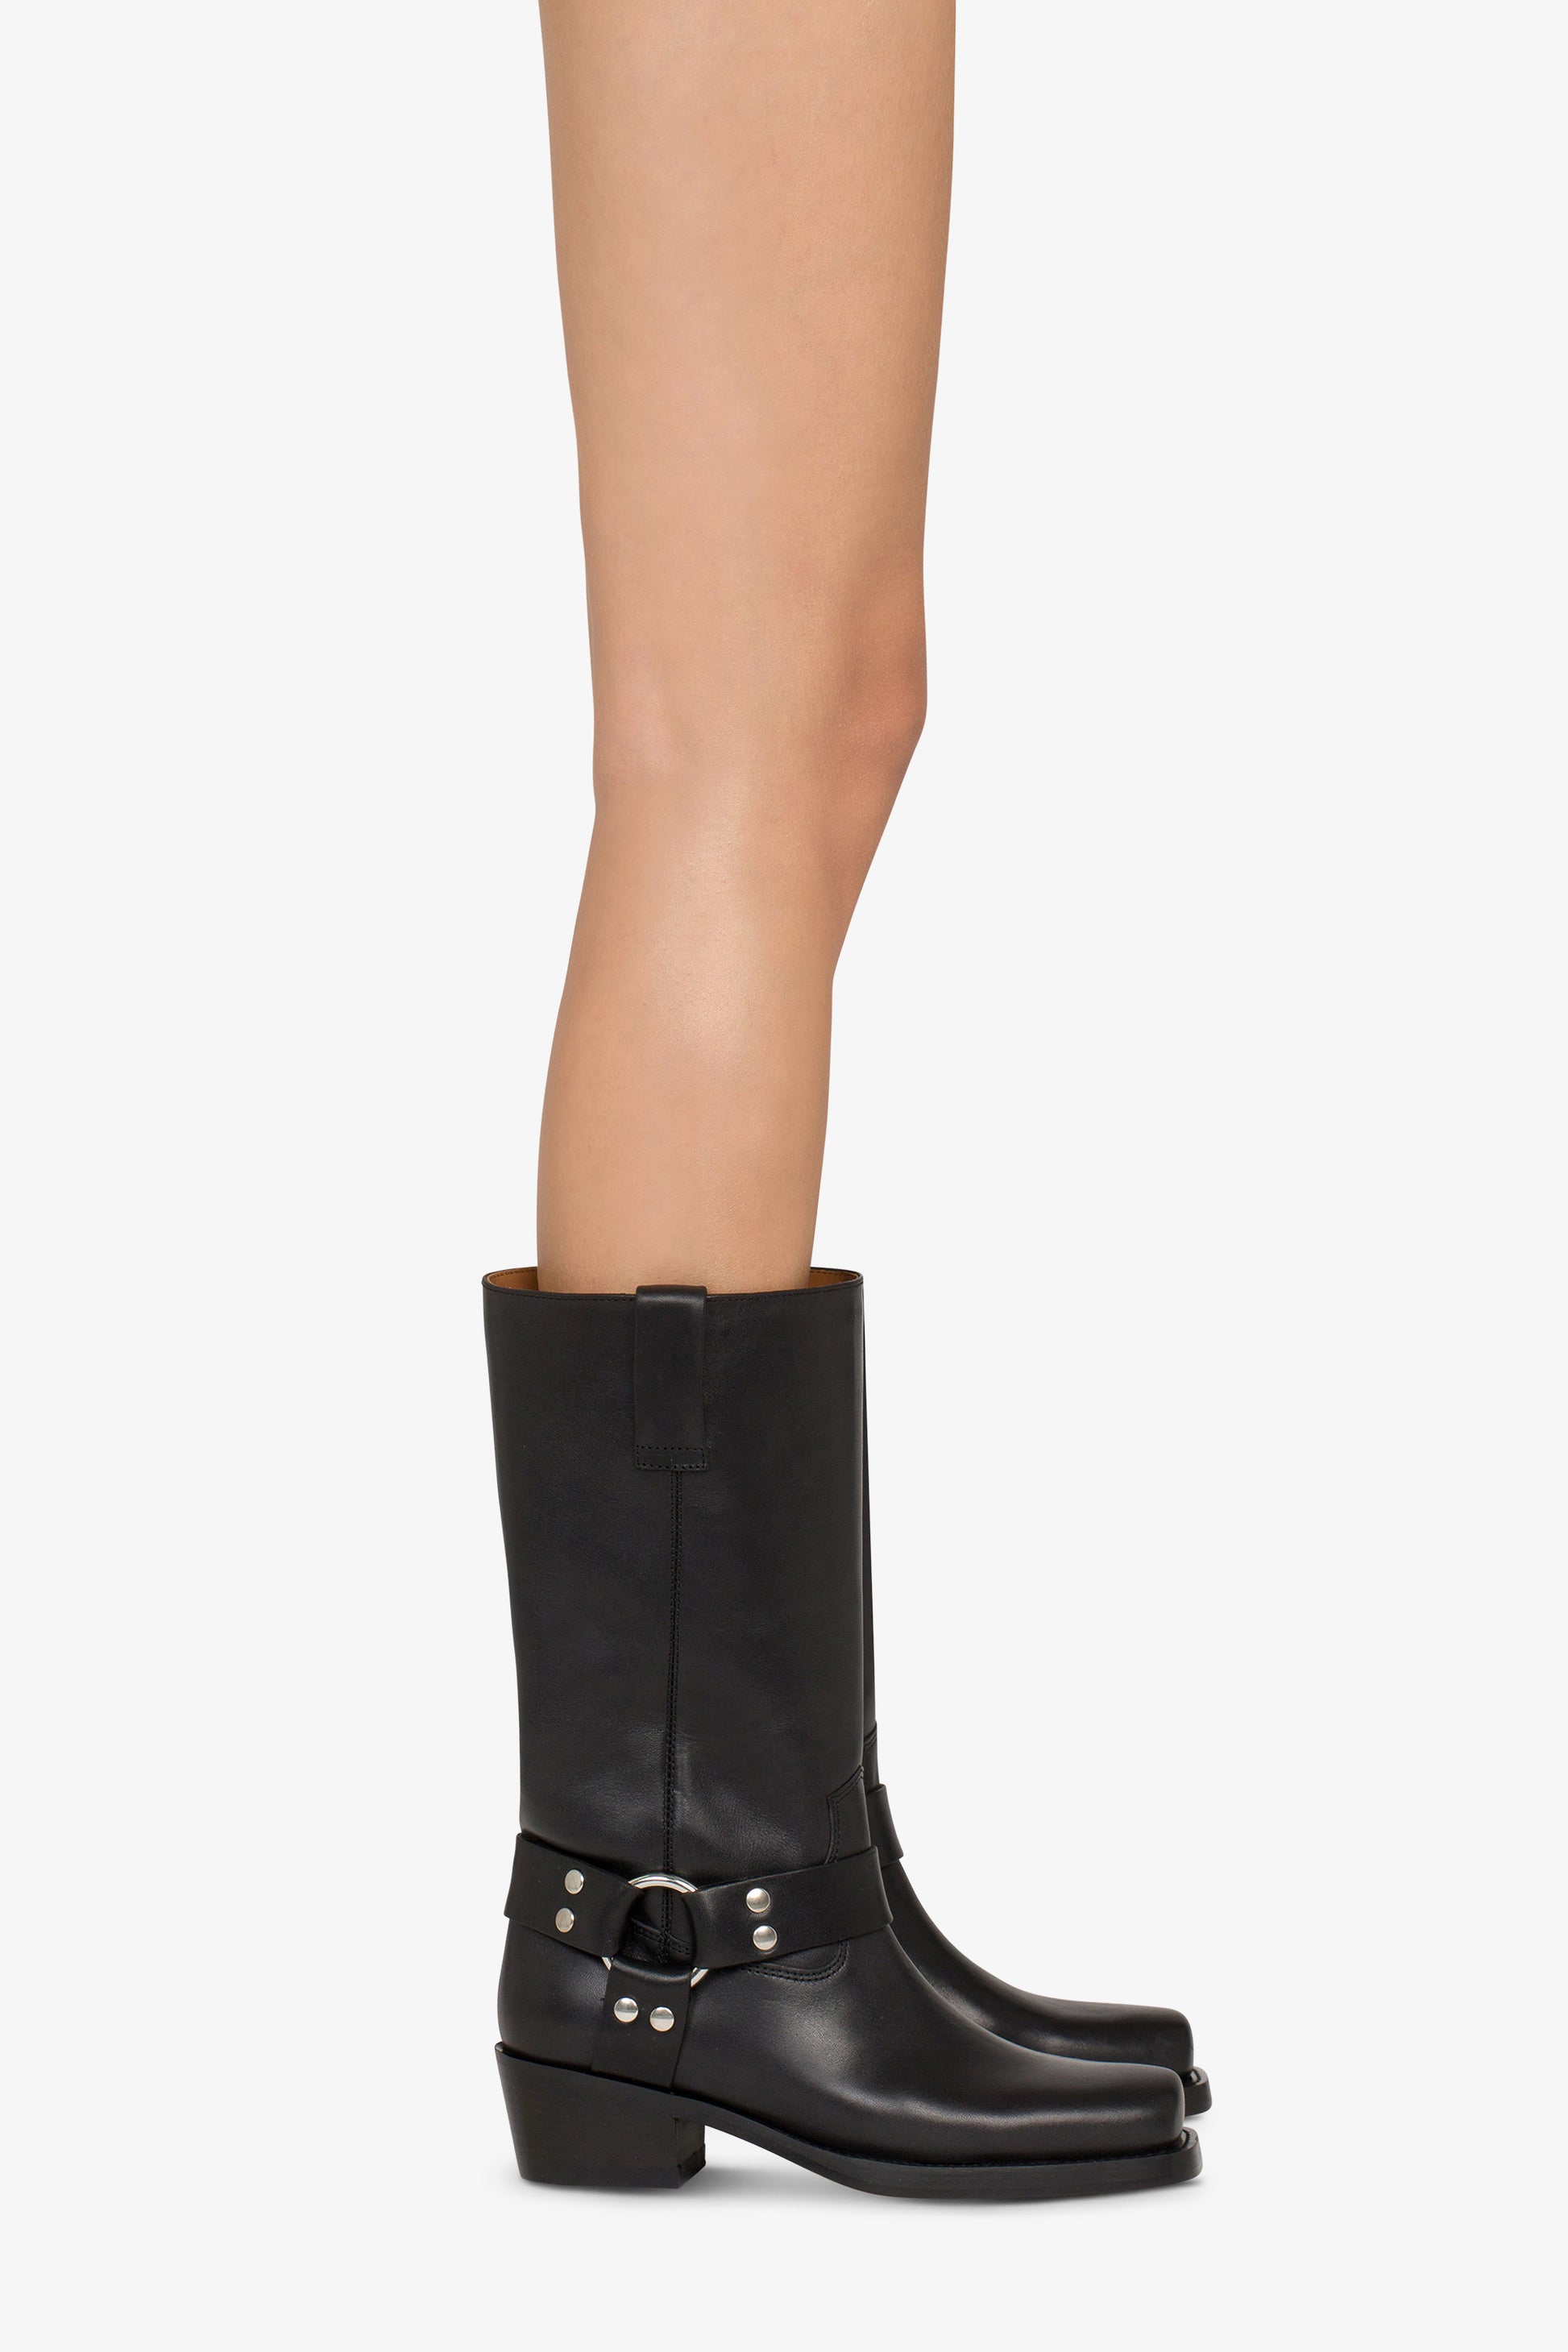 Square-toe boots in smooth black leather - Producto usado